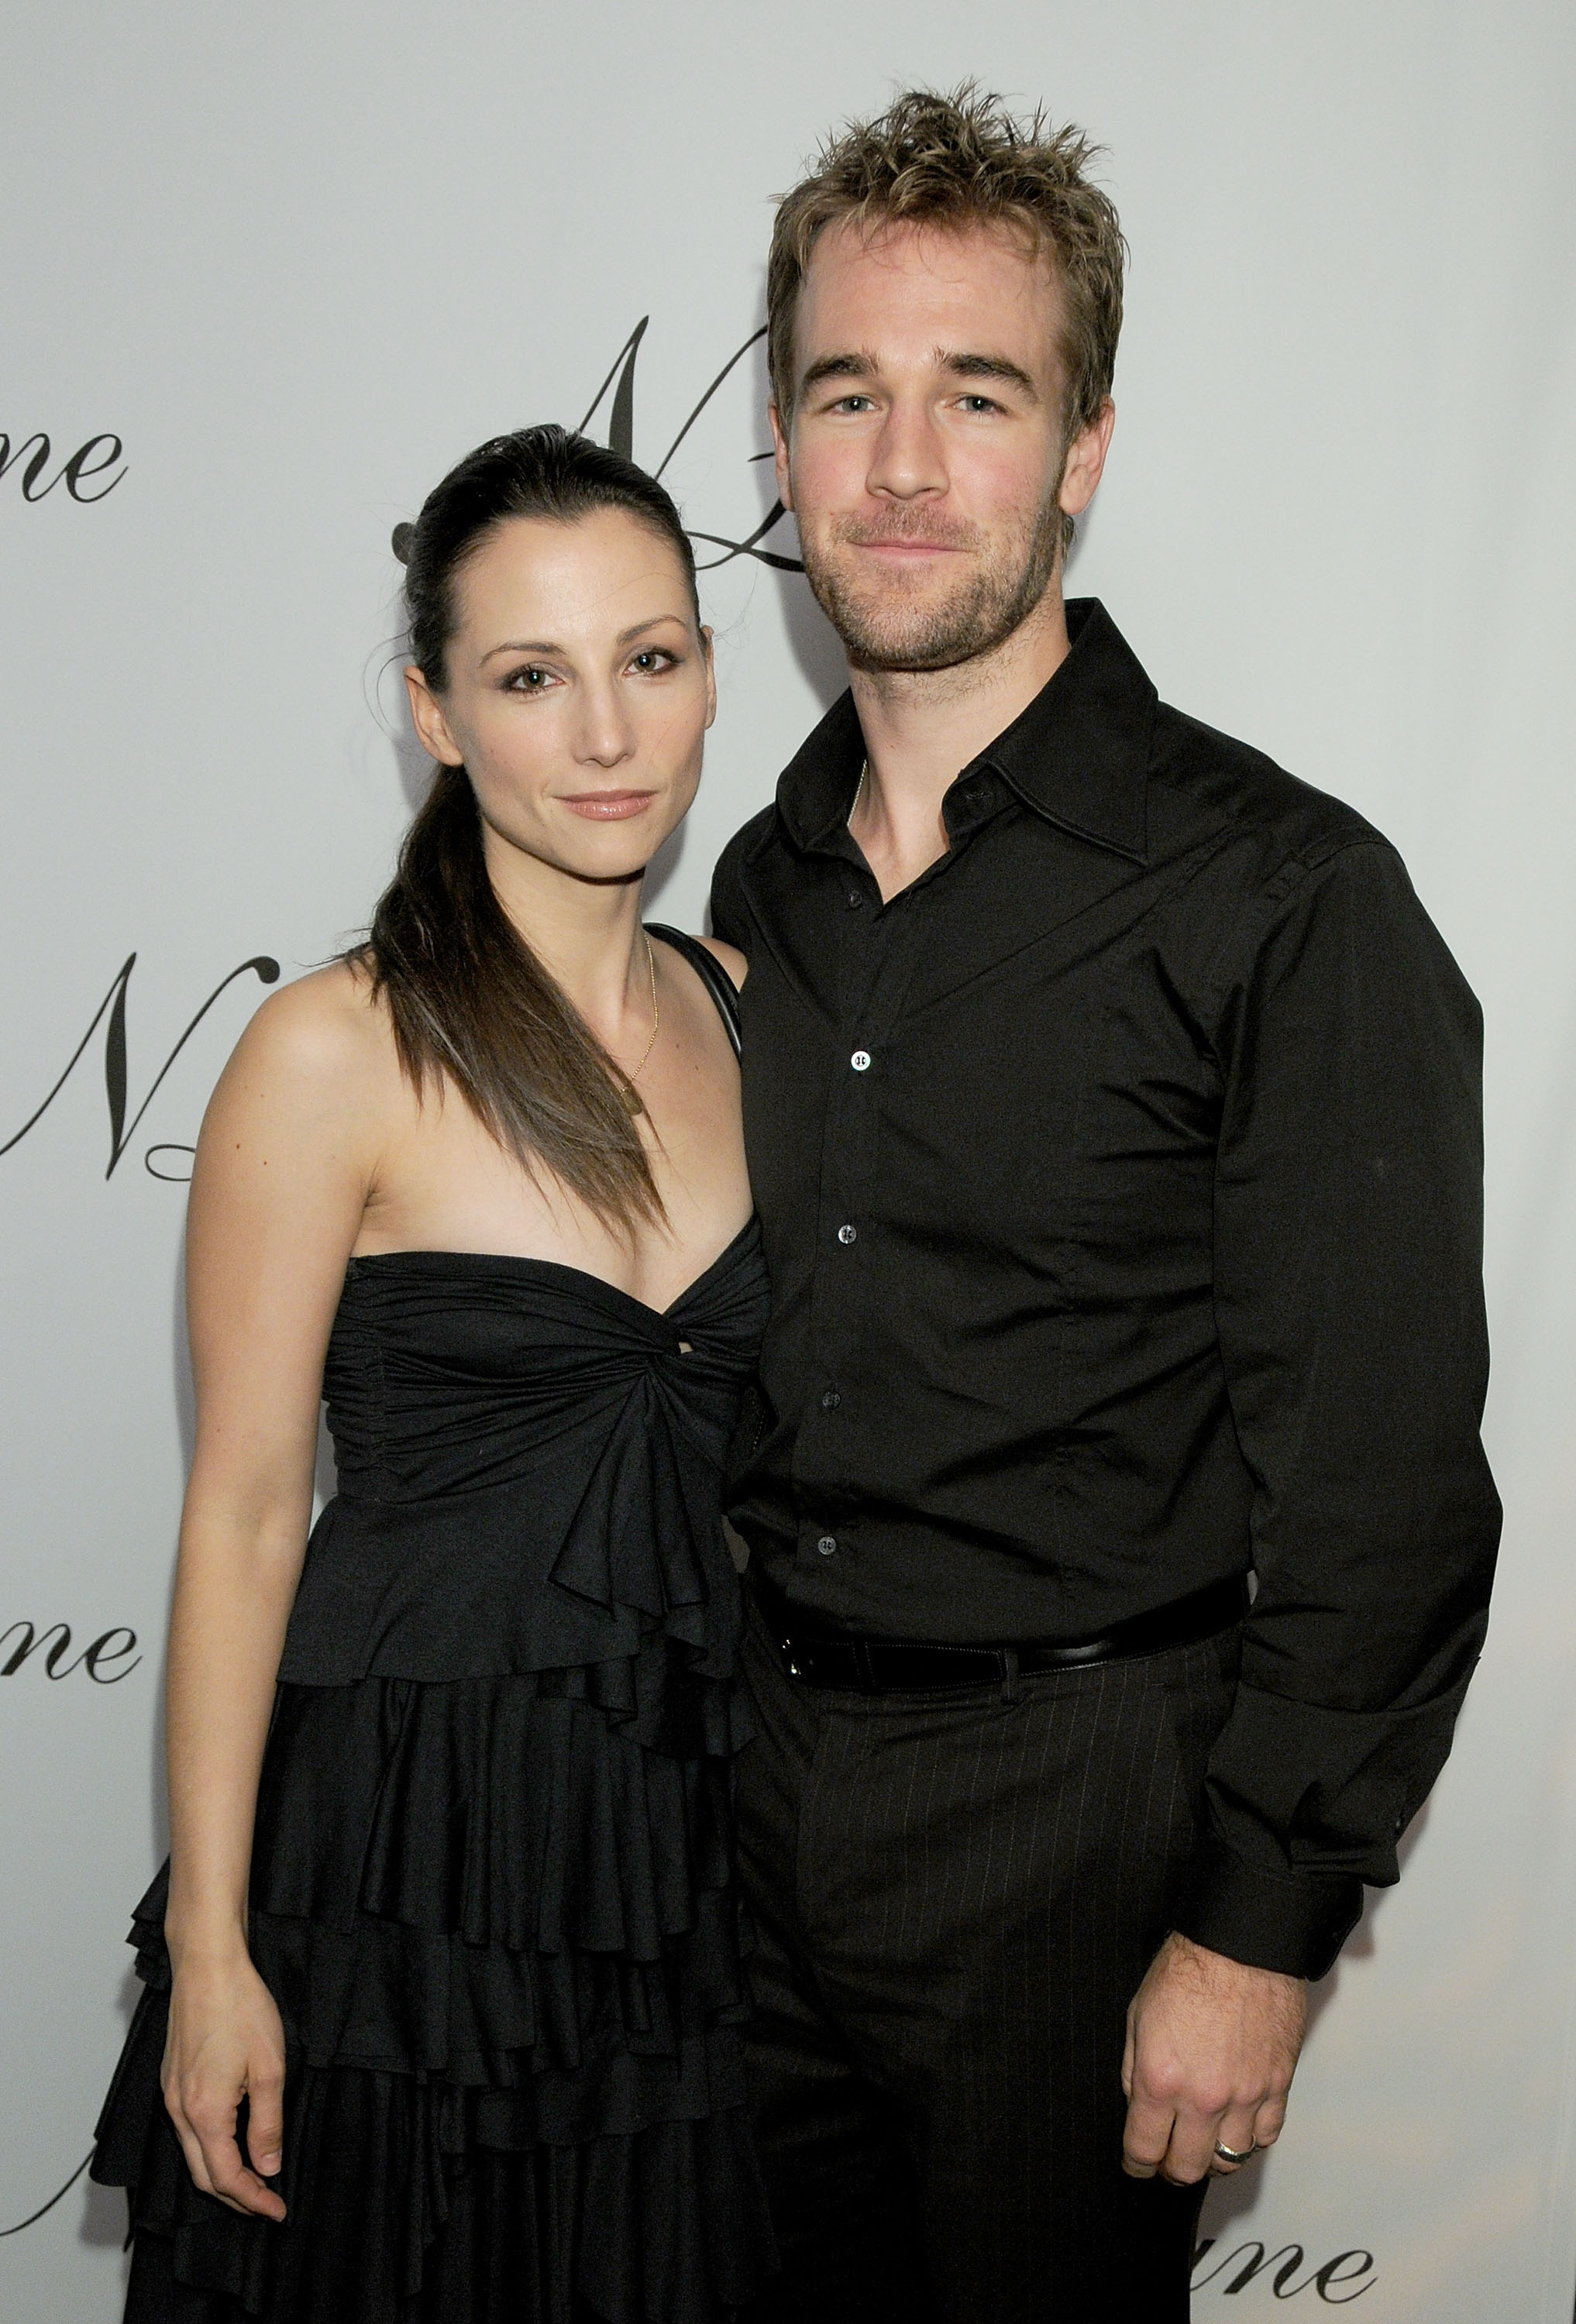 James Van Der Beek and Heather McComb at the Neil Lane Unveiling of his Flagship Store in Los Angeles on October 29, 2008. | Source: Gregg DeGuire/WireImage/Getty Images